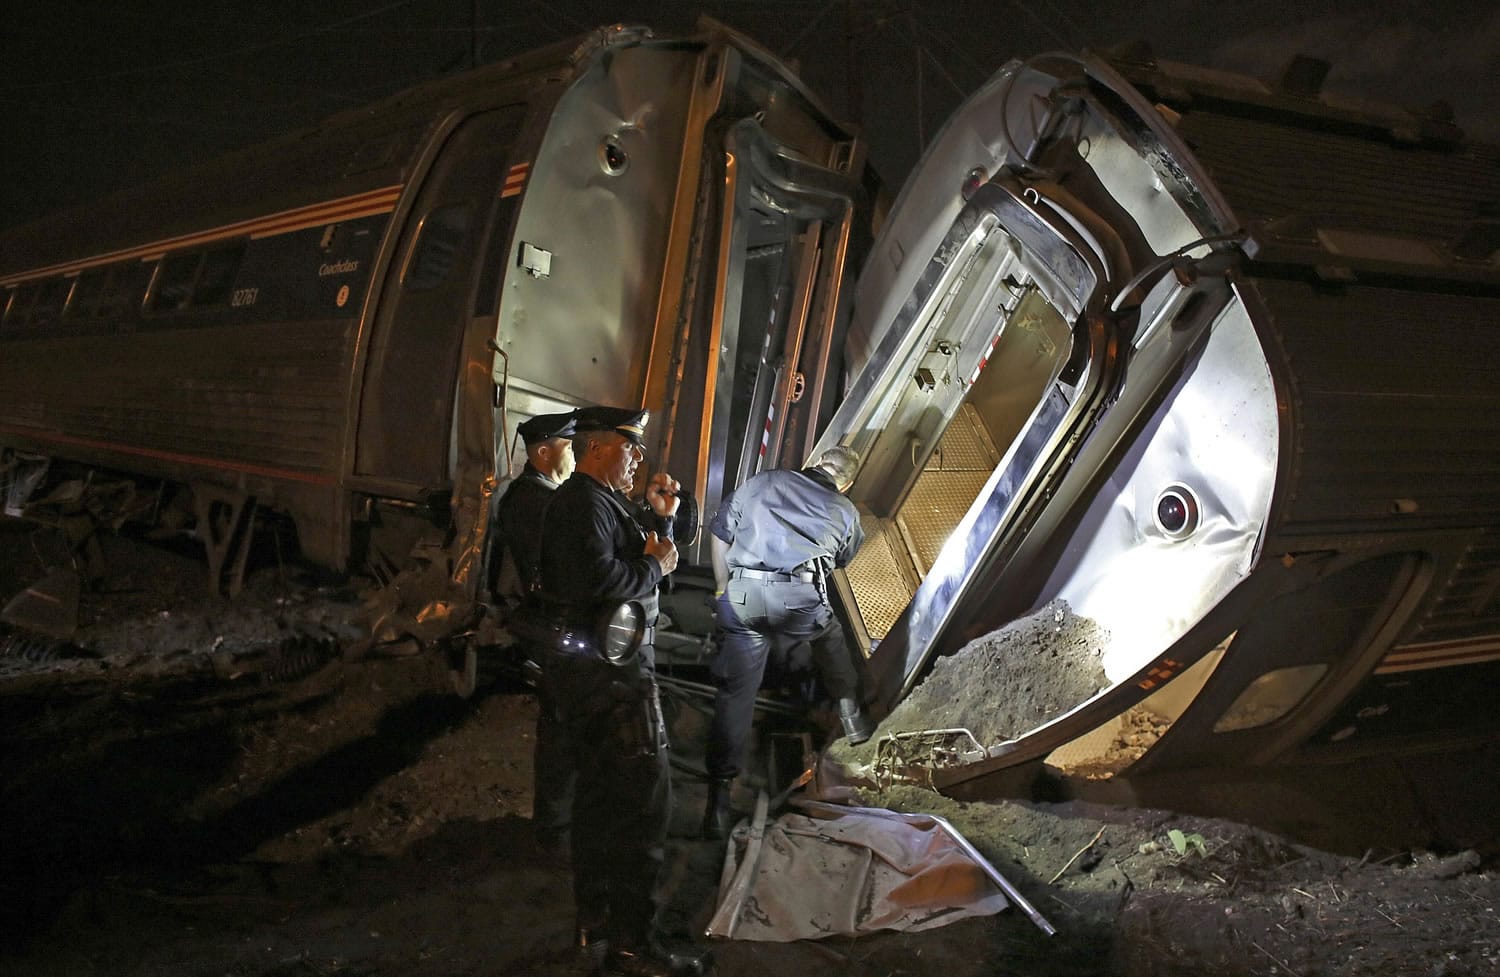 FILE - In this May 12, 2015 file photo, emergency personnel work the scene of a train wreck An Amtrak train headed to New York City derailed and crashed in Philadelphia. Amtrak says it will install video cameras inside locomotive cabs that record the actions of train engineers. The move follows a deadly derailment earlier this month in which investigators are searching for clues to the train engineer's actions just before the crash.